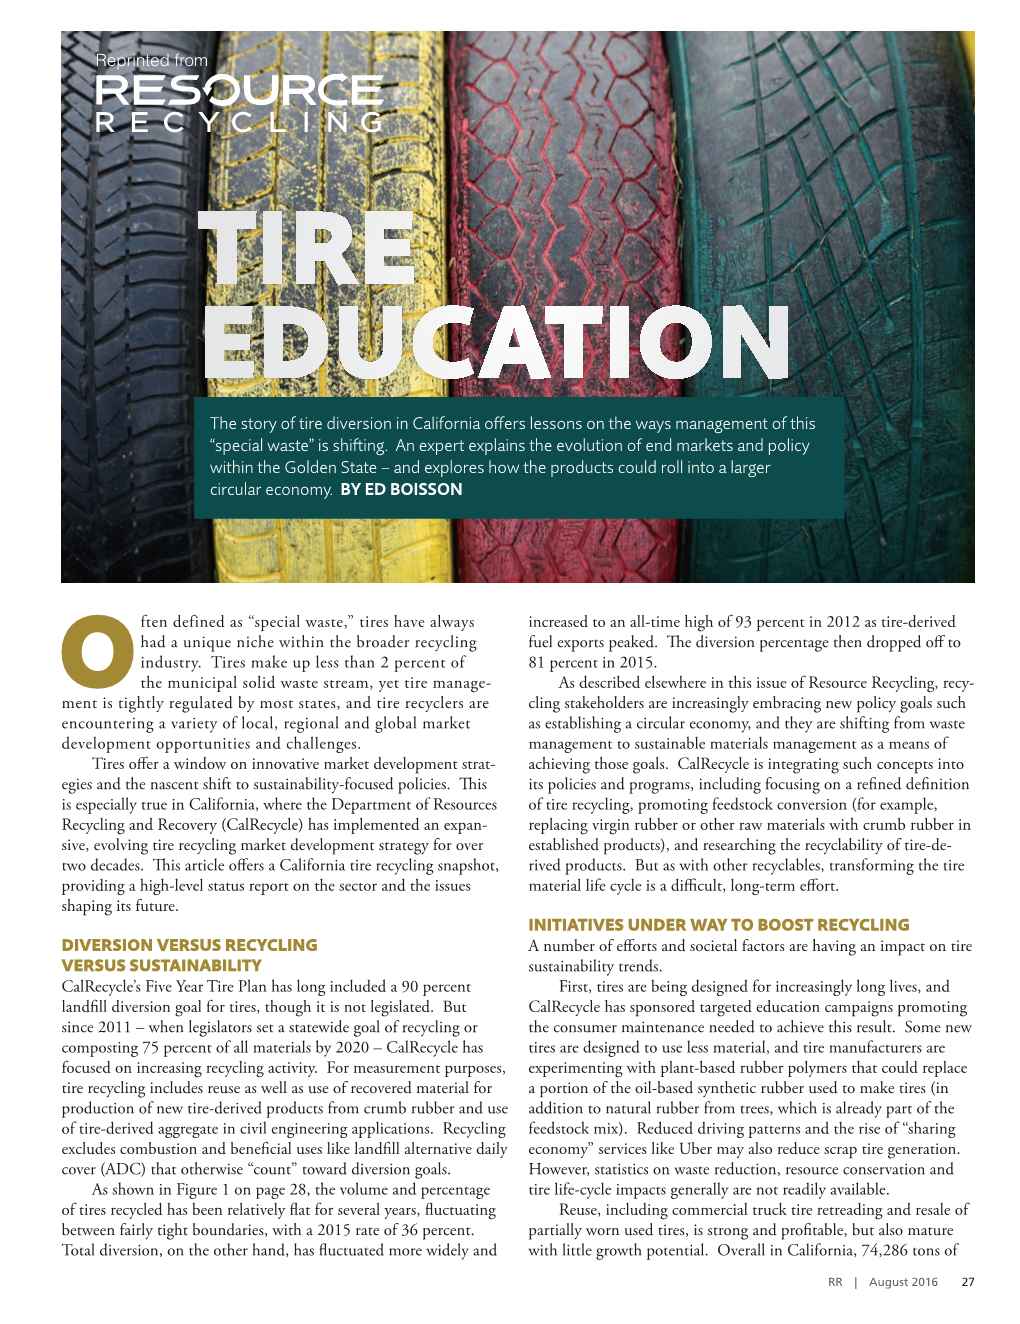 TIRE EDUCATION the Story of Tire Diversion in California Offers Lessons on the Ways Management of This “Special Waste” Is Shifting